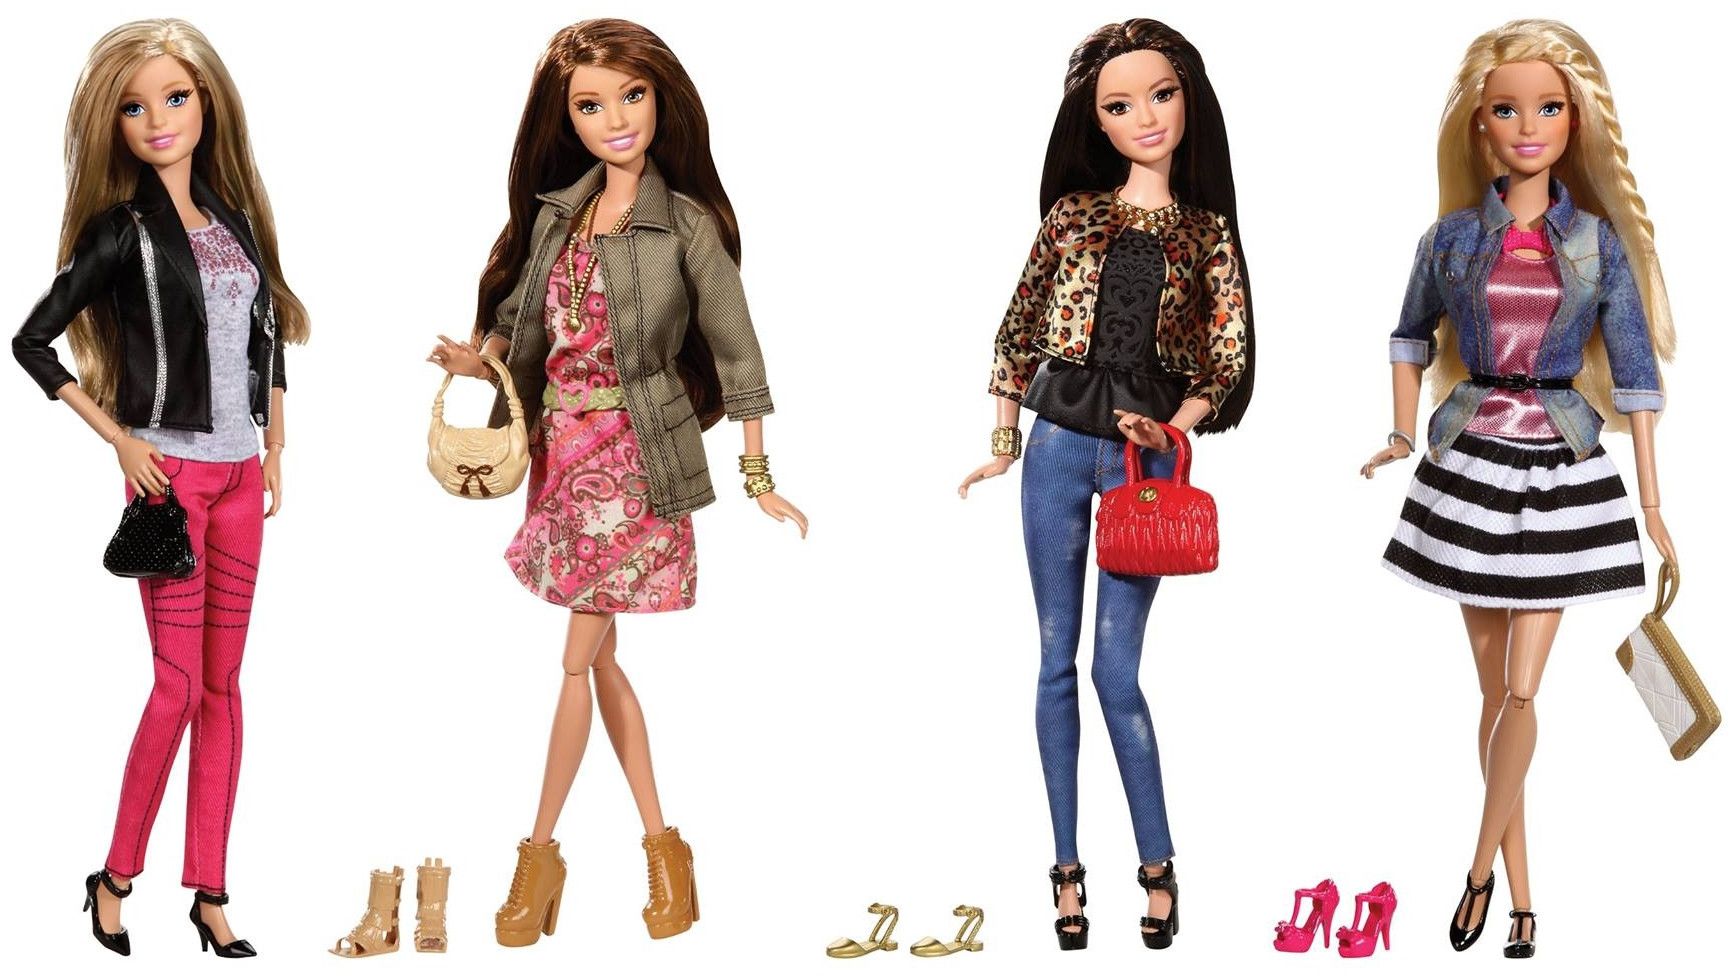 My Dolls A About Barbie And Other Fashion News